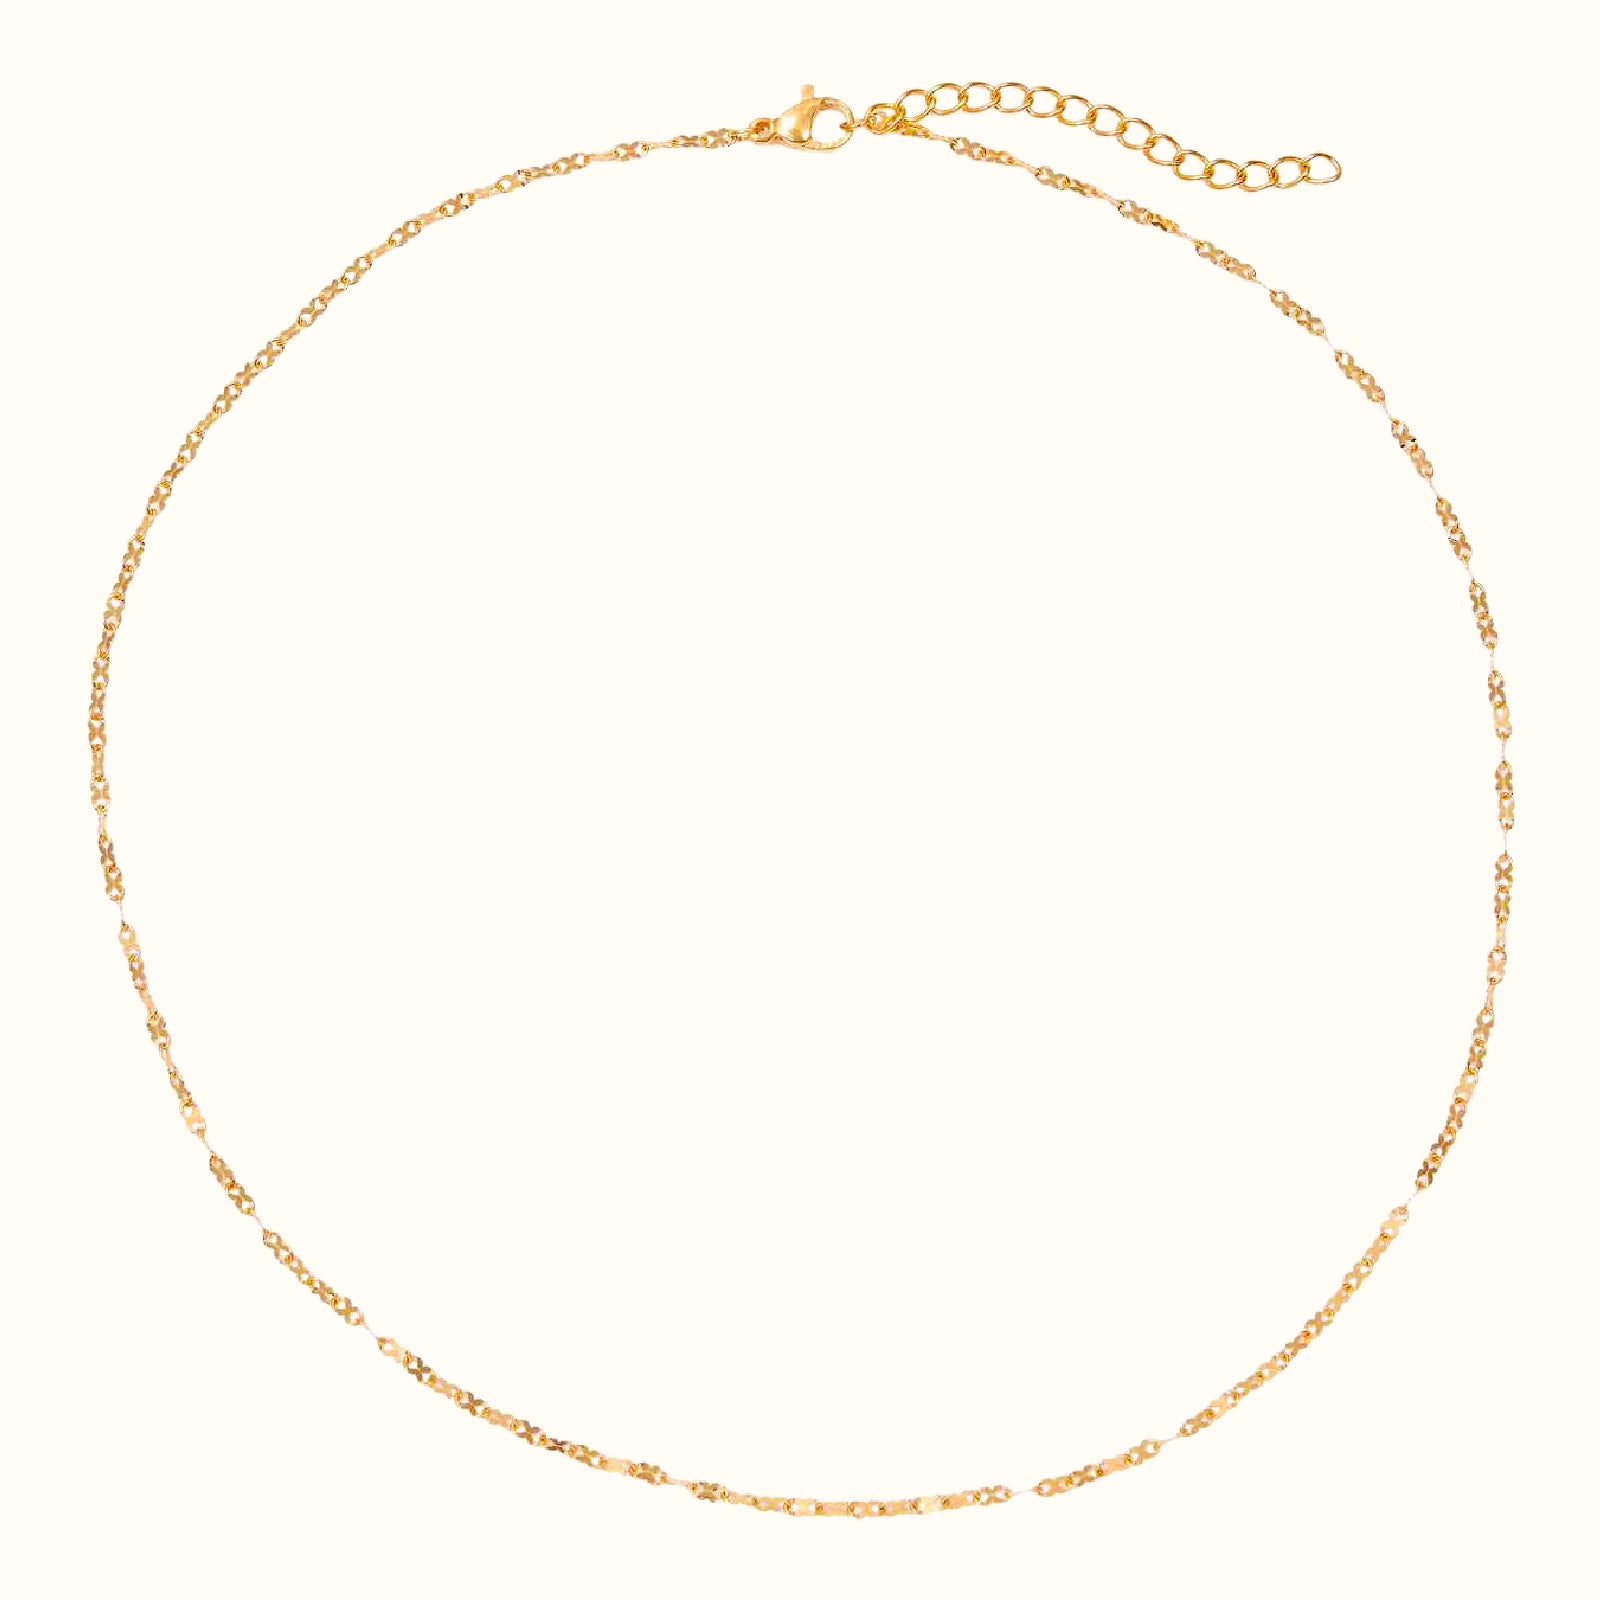 Gold Mini Stars Links Chain Necklace